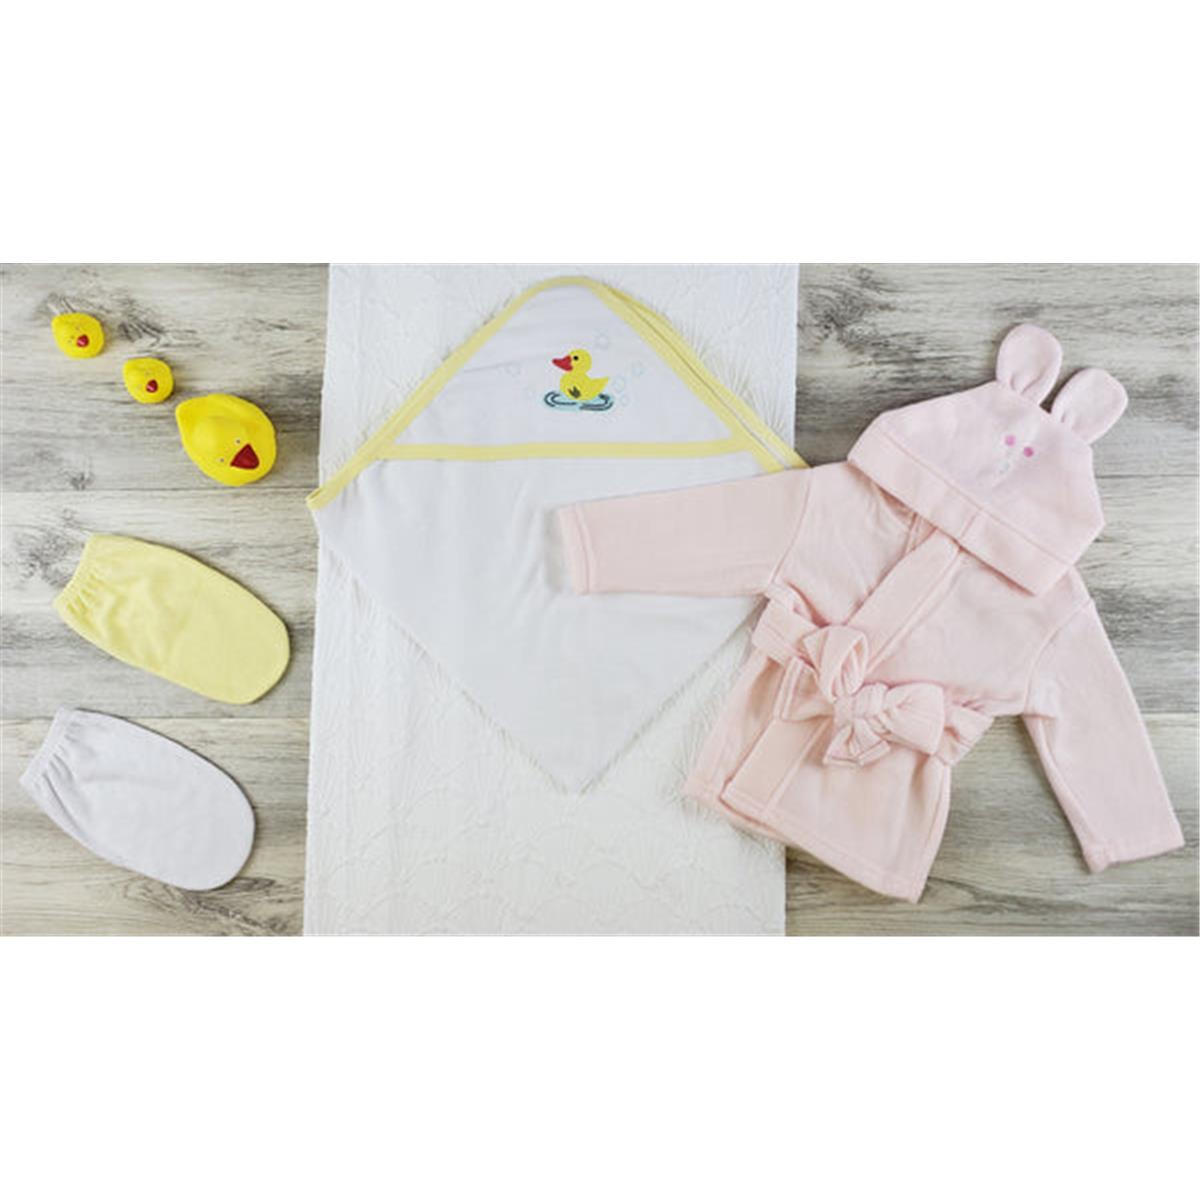 Picture of Bambini LS-0631 Hooded Towel&#44; Bath Mittens & Robe - Yellow&#44; White & Pink - Newborn